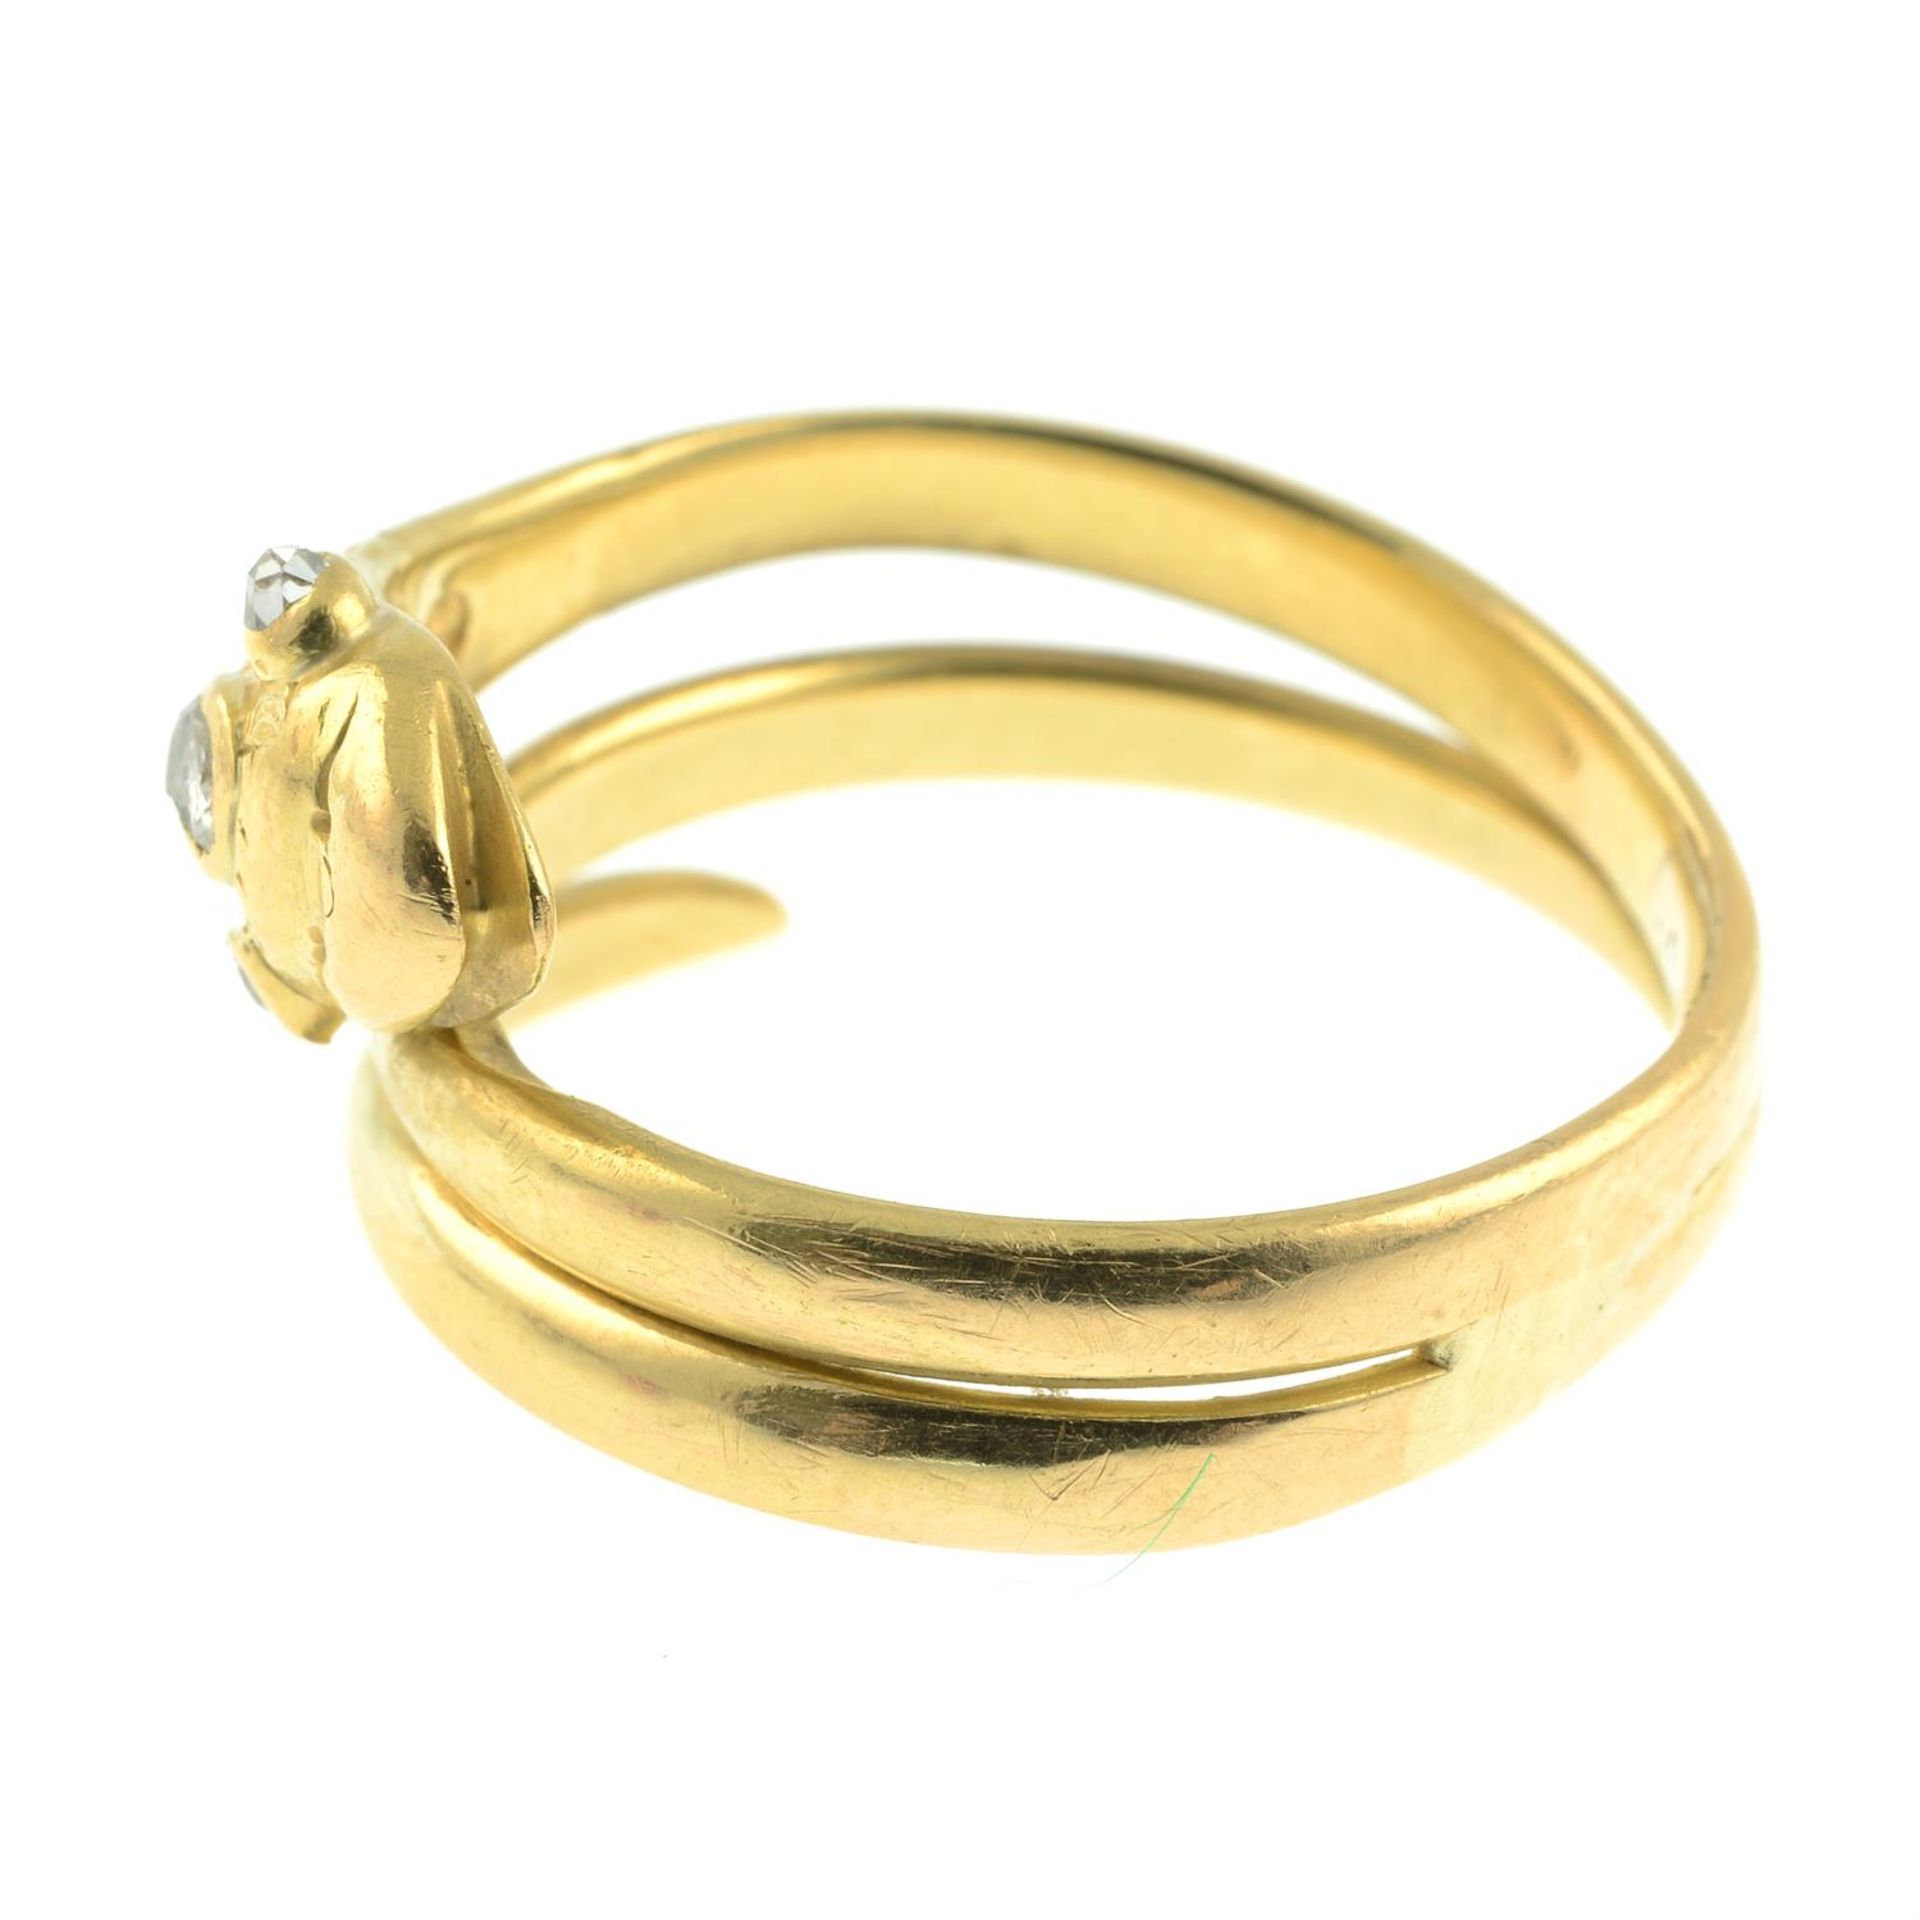 A mid Victorian 18ct gold snake ring, with diamond crest and eyes. - Image 3 of 5